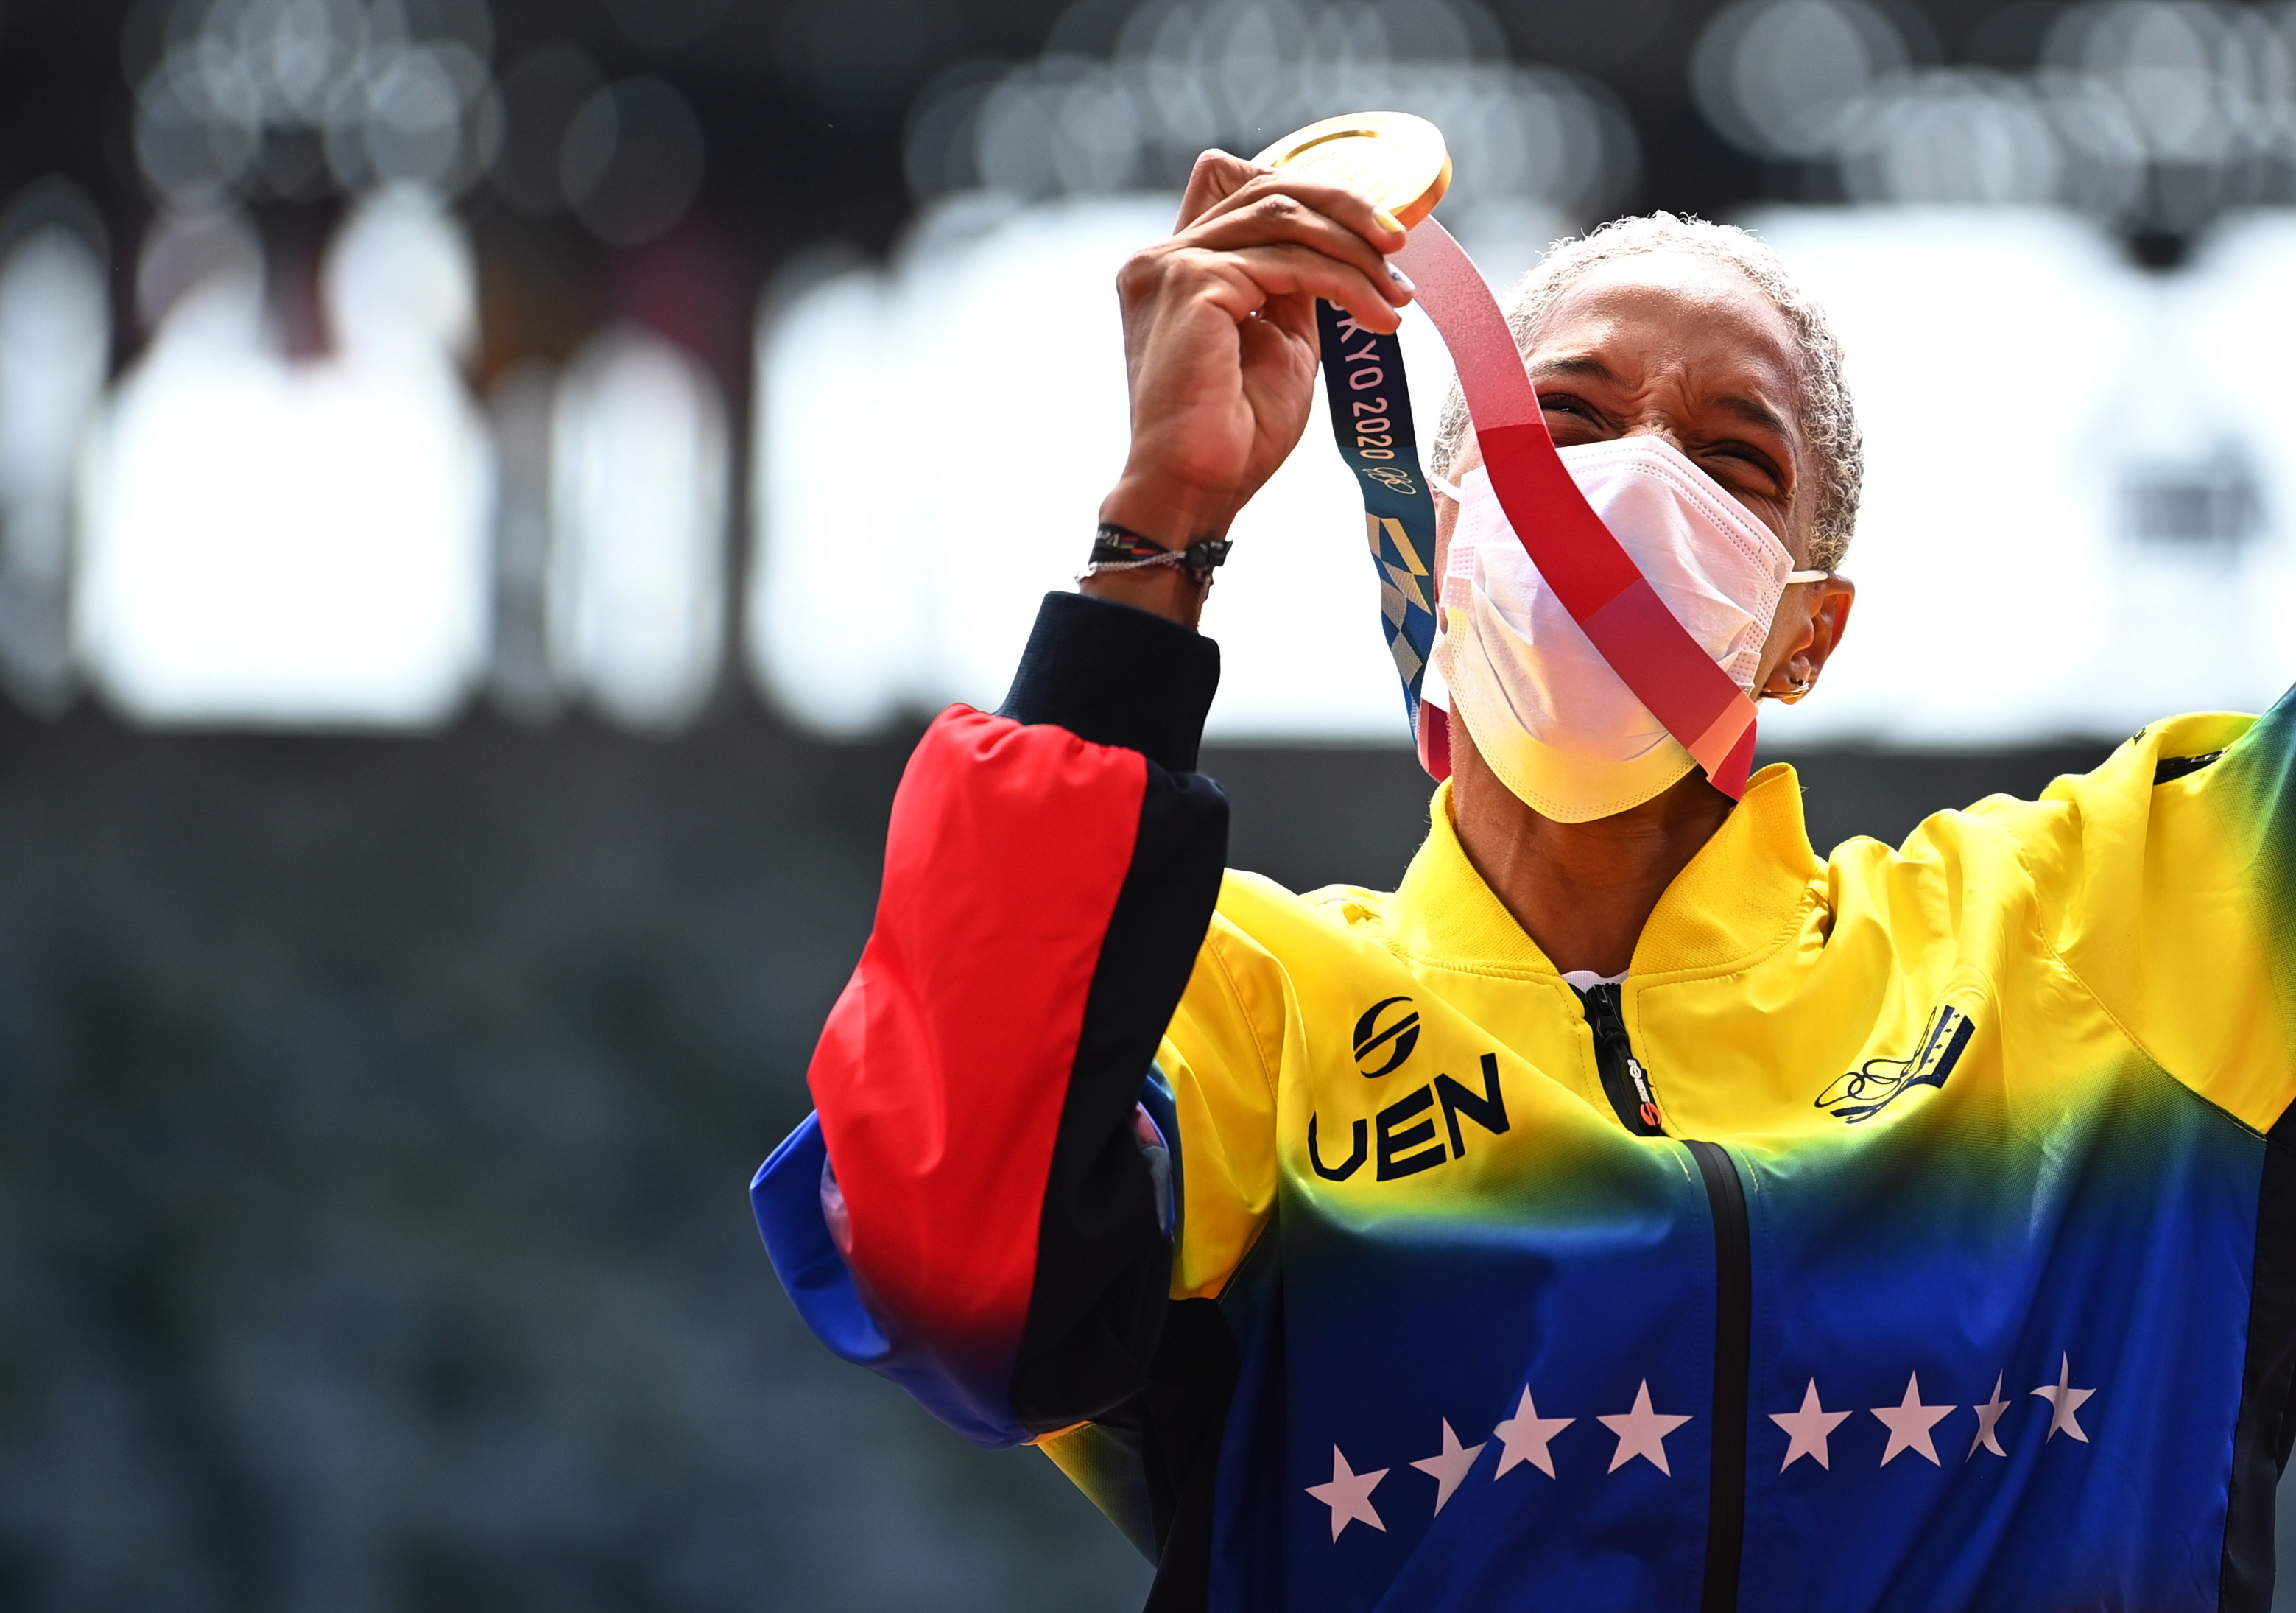 Tokyo 2020 Olympics - Athletics - Women's Triple Jump - Medal Ceremony - Olympic Stadium, Tokyo, Japan - August 2, 2021. Gold medallist, Yulimar Rojas of Venezuela celebrates on the podium wearing a protective face mask REUTERS/Dylan Martinez